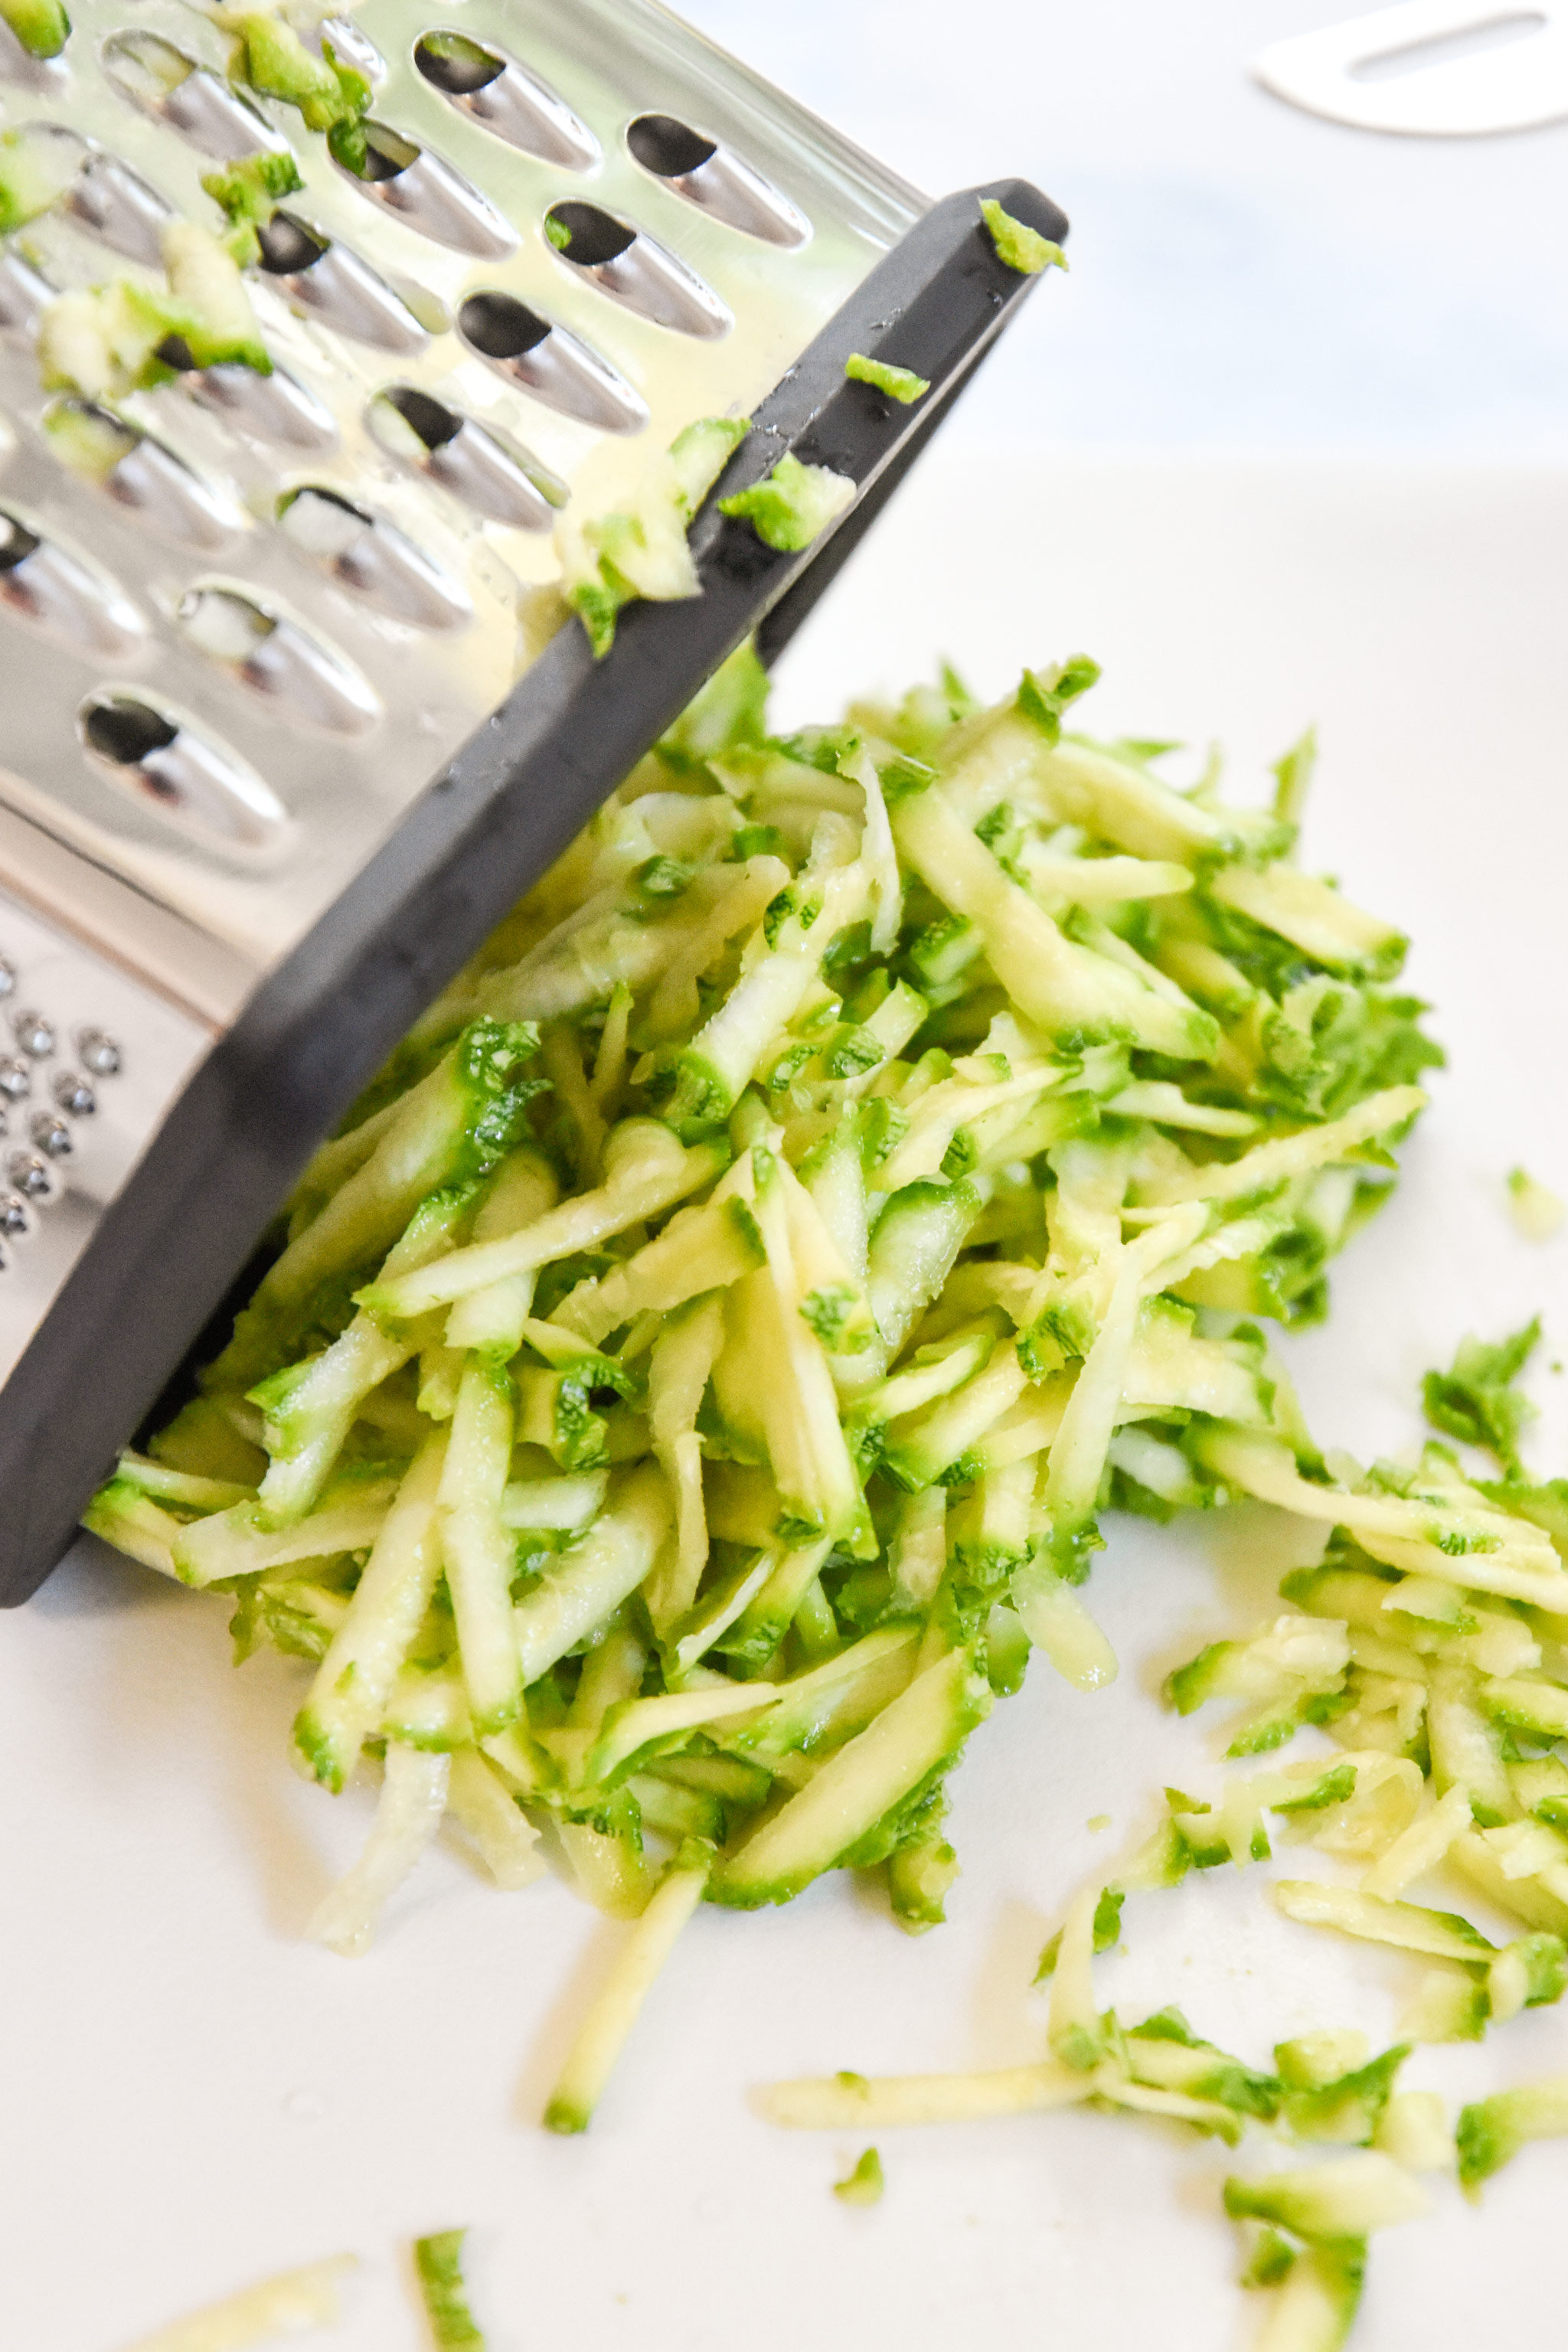 shredded zucchini with a box grater prepared to make muffins.